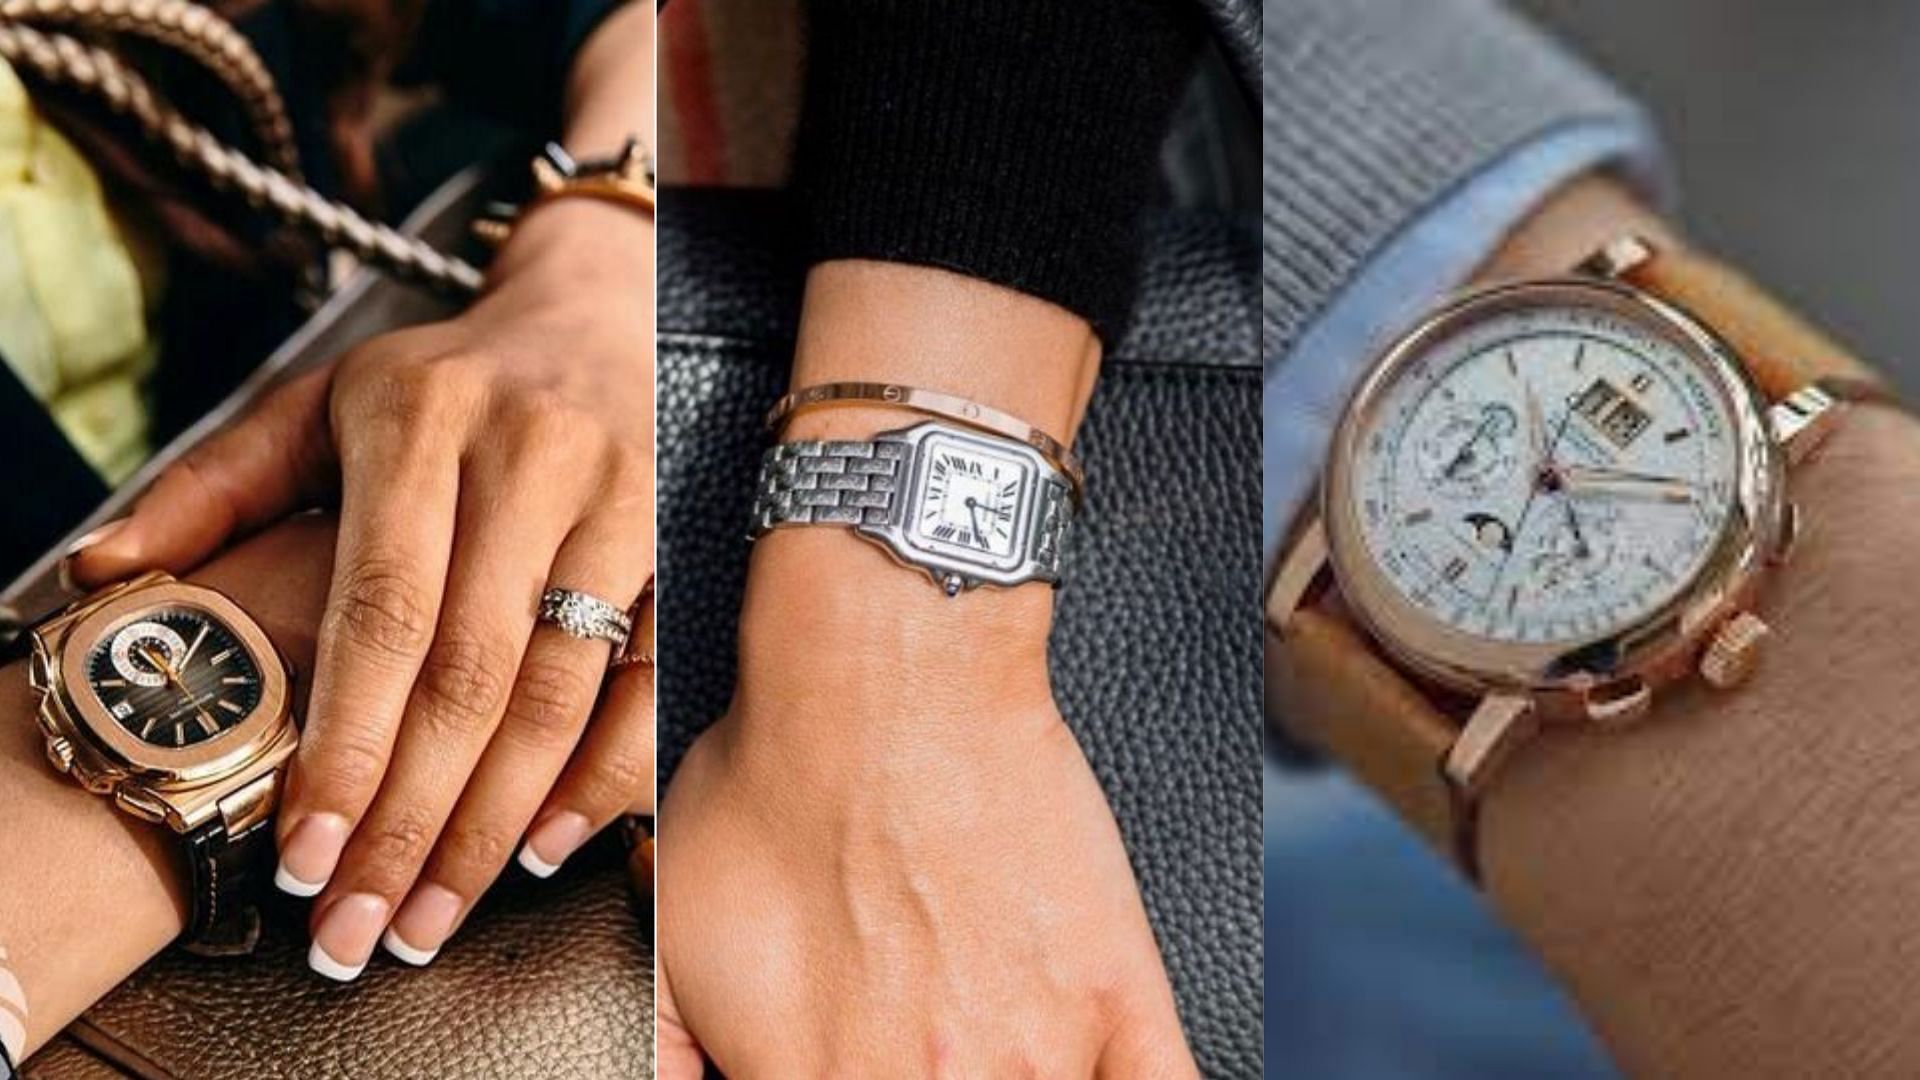 5 most expensive luxury brands for watches